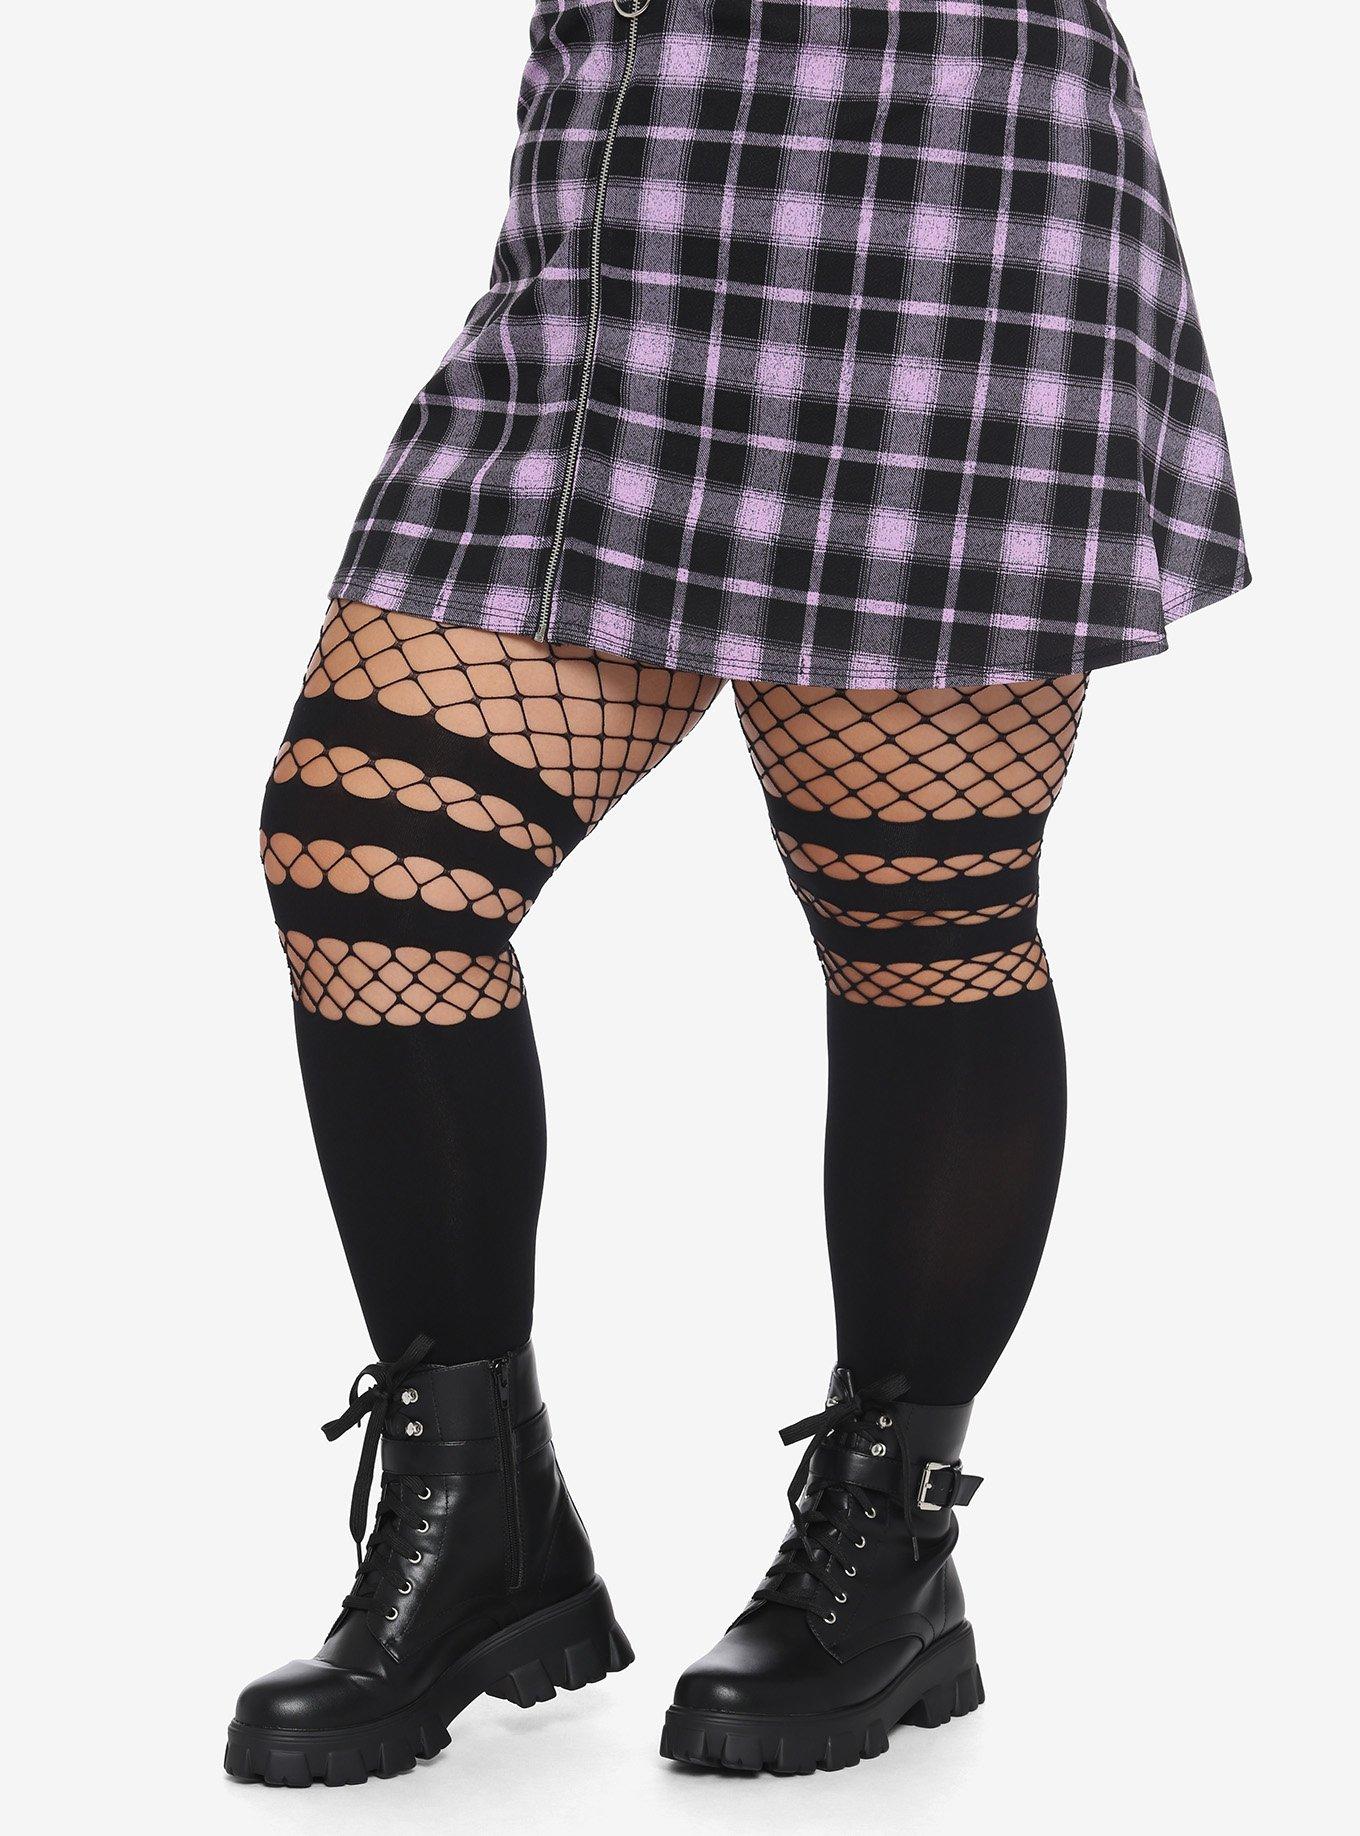 Wetland kompleksitet periode Faux Thigh High Stripes & Fishnet Tights Plus Size | Hot Topic